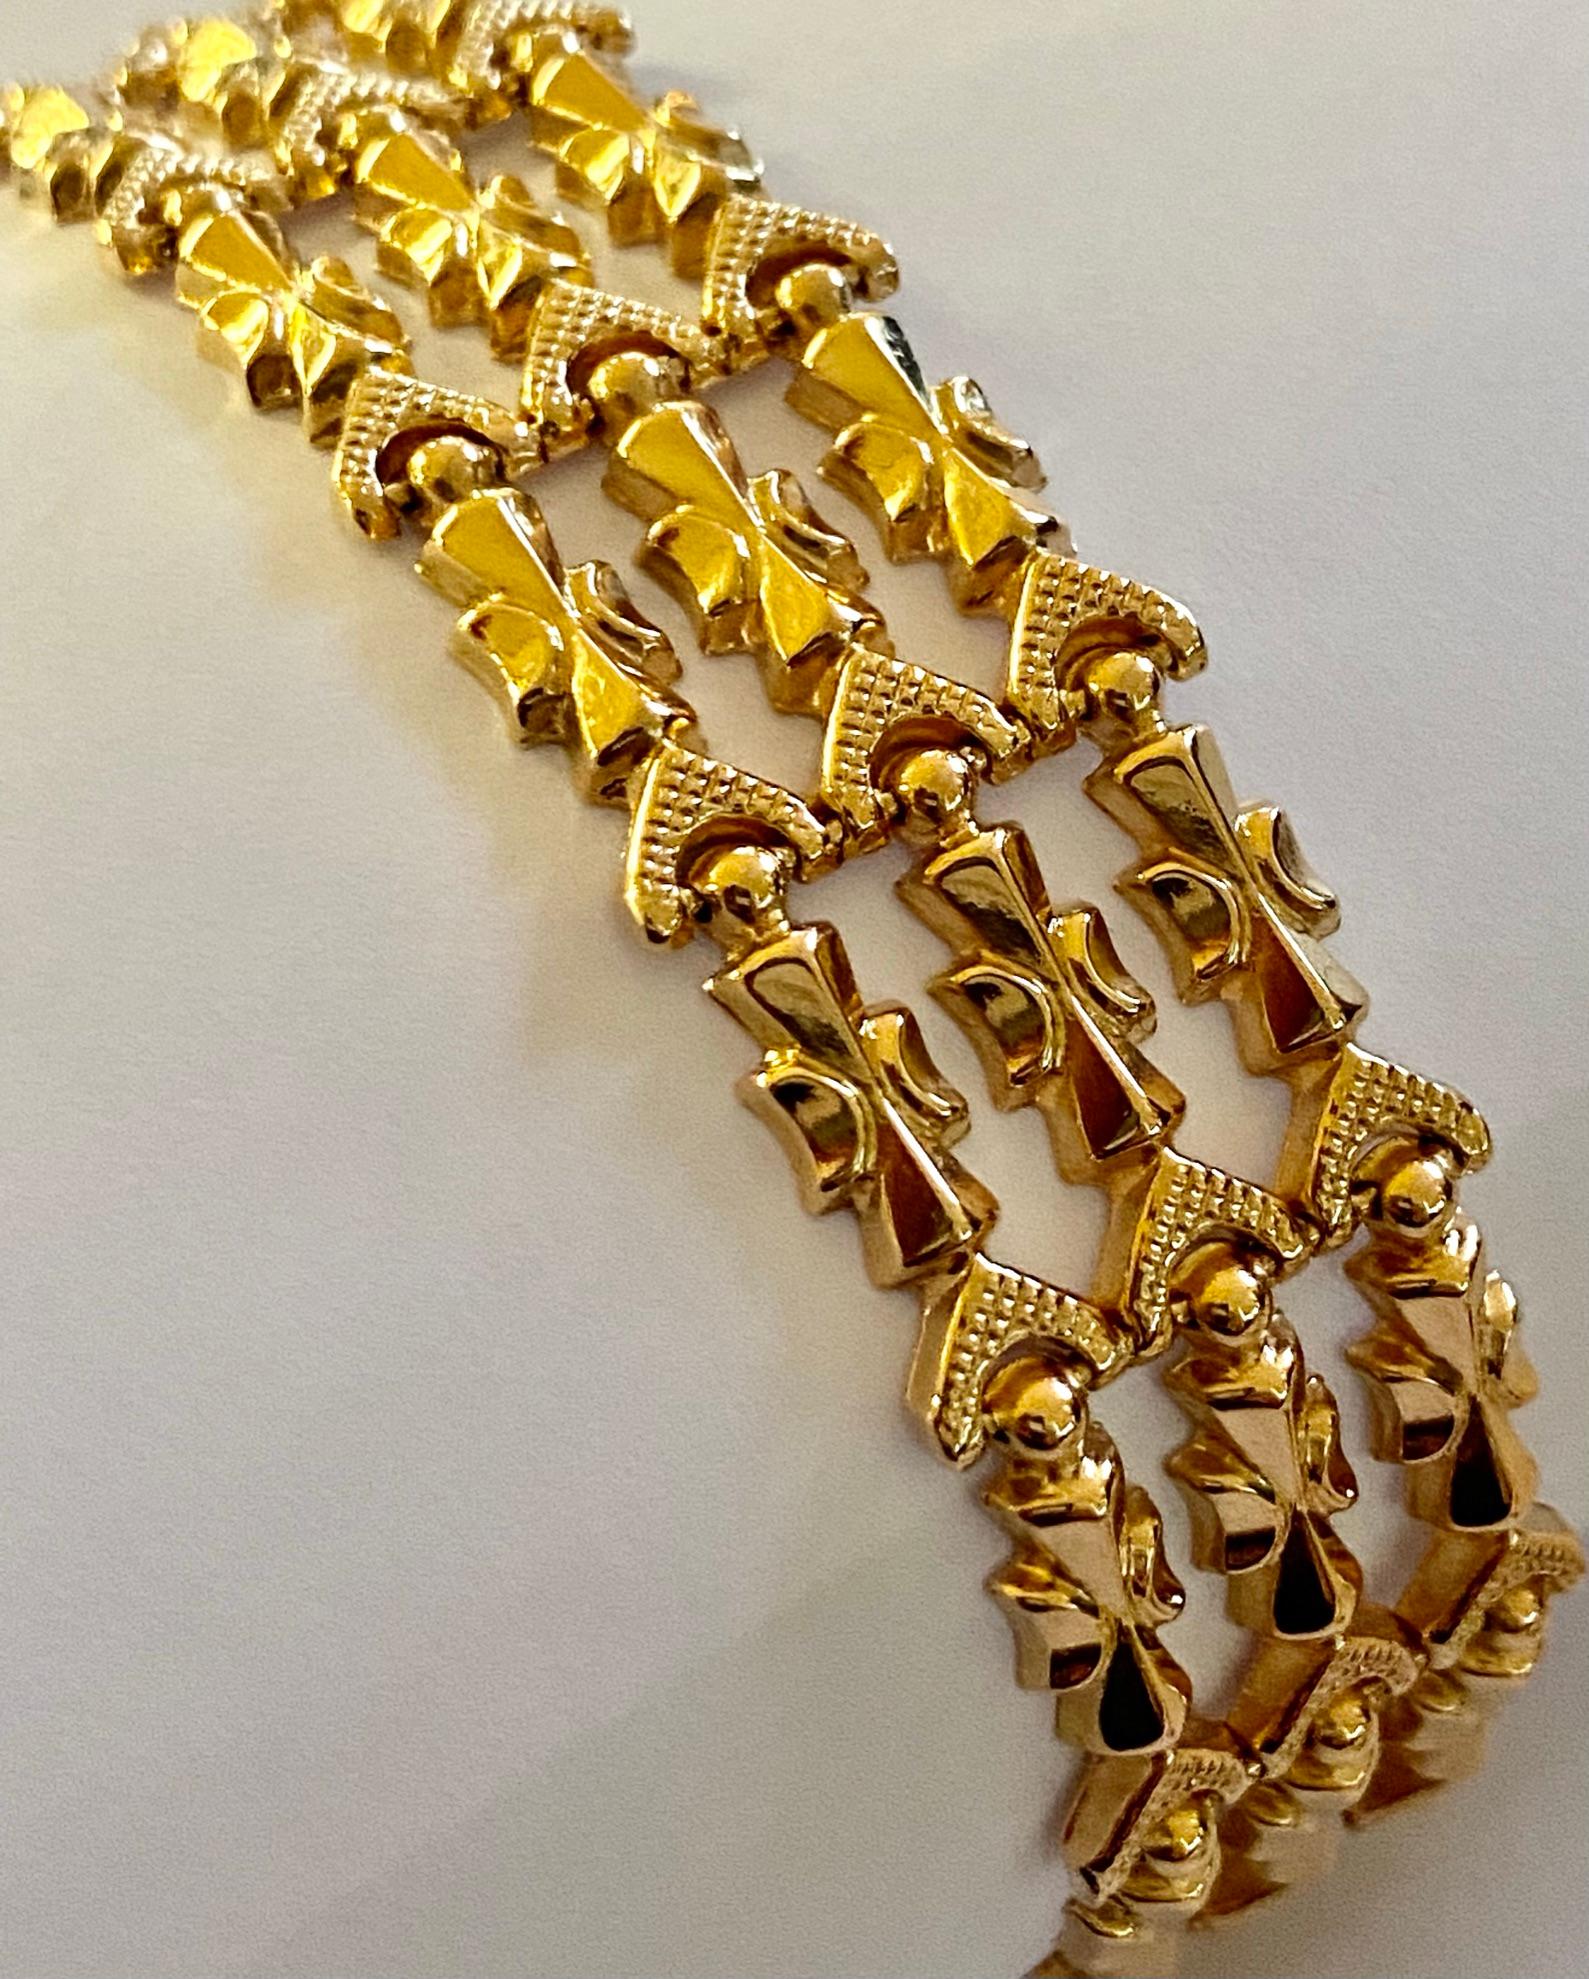 - 750/- Gold bracelet, pinned model, Italy ca. 1950
- length: 17 cm.
- Wide: 1.7 cm.
- thick: 2 mm.
- Weight: 19.59 grams.
- Features Italian makers character and gold characters, and
  Dutch import warranty guarantee sign.
- Maker: 197VI = Egidio